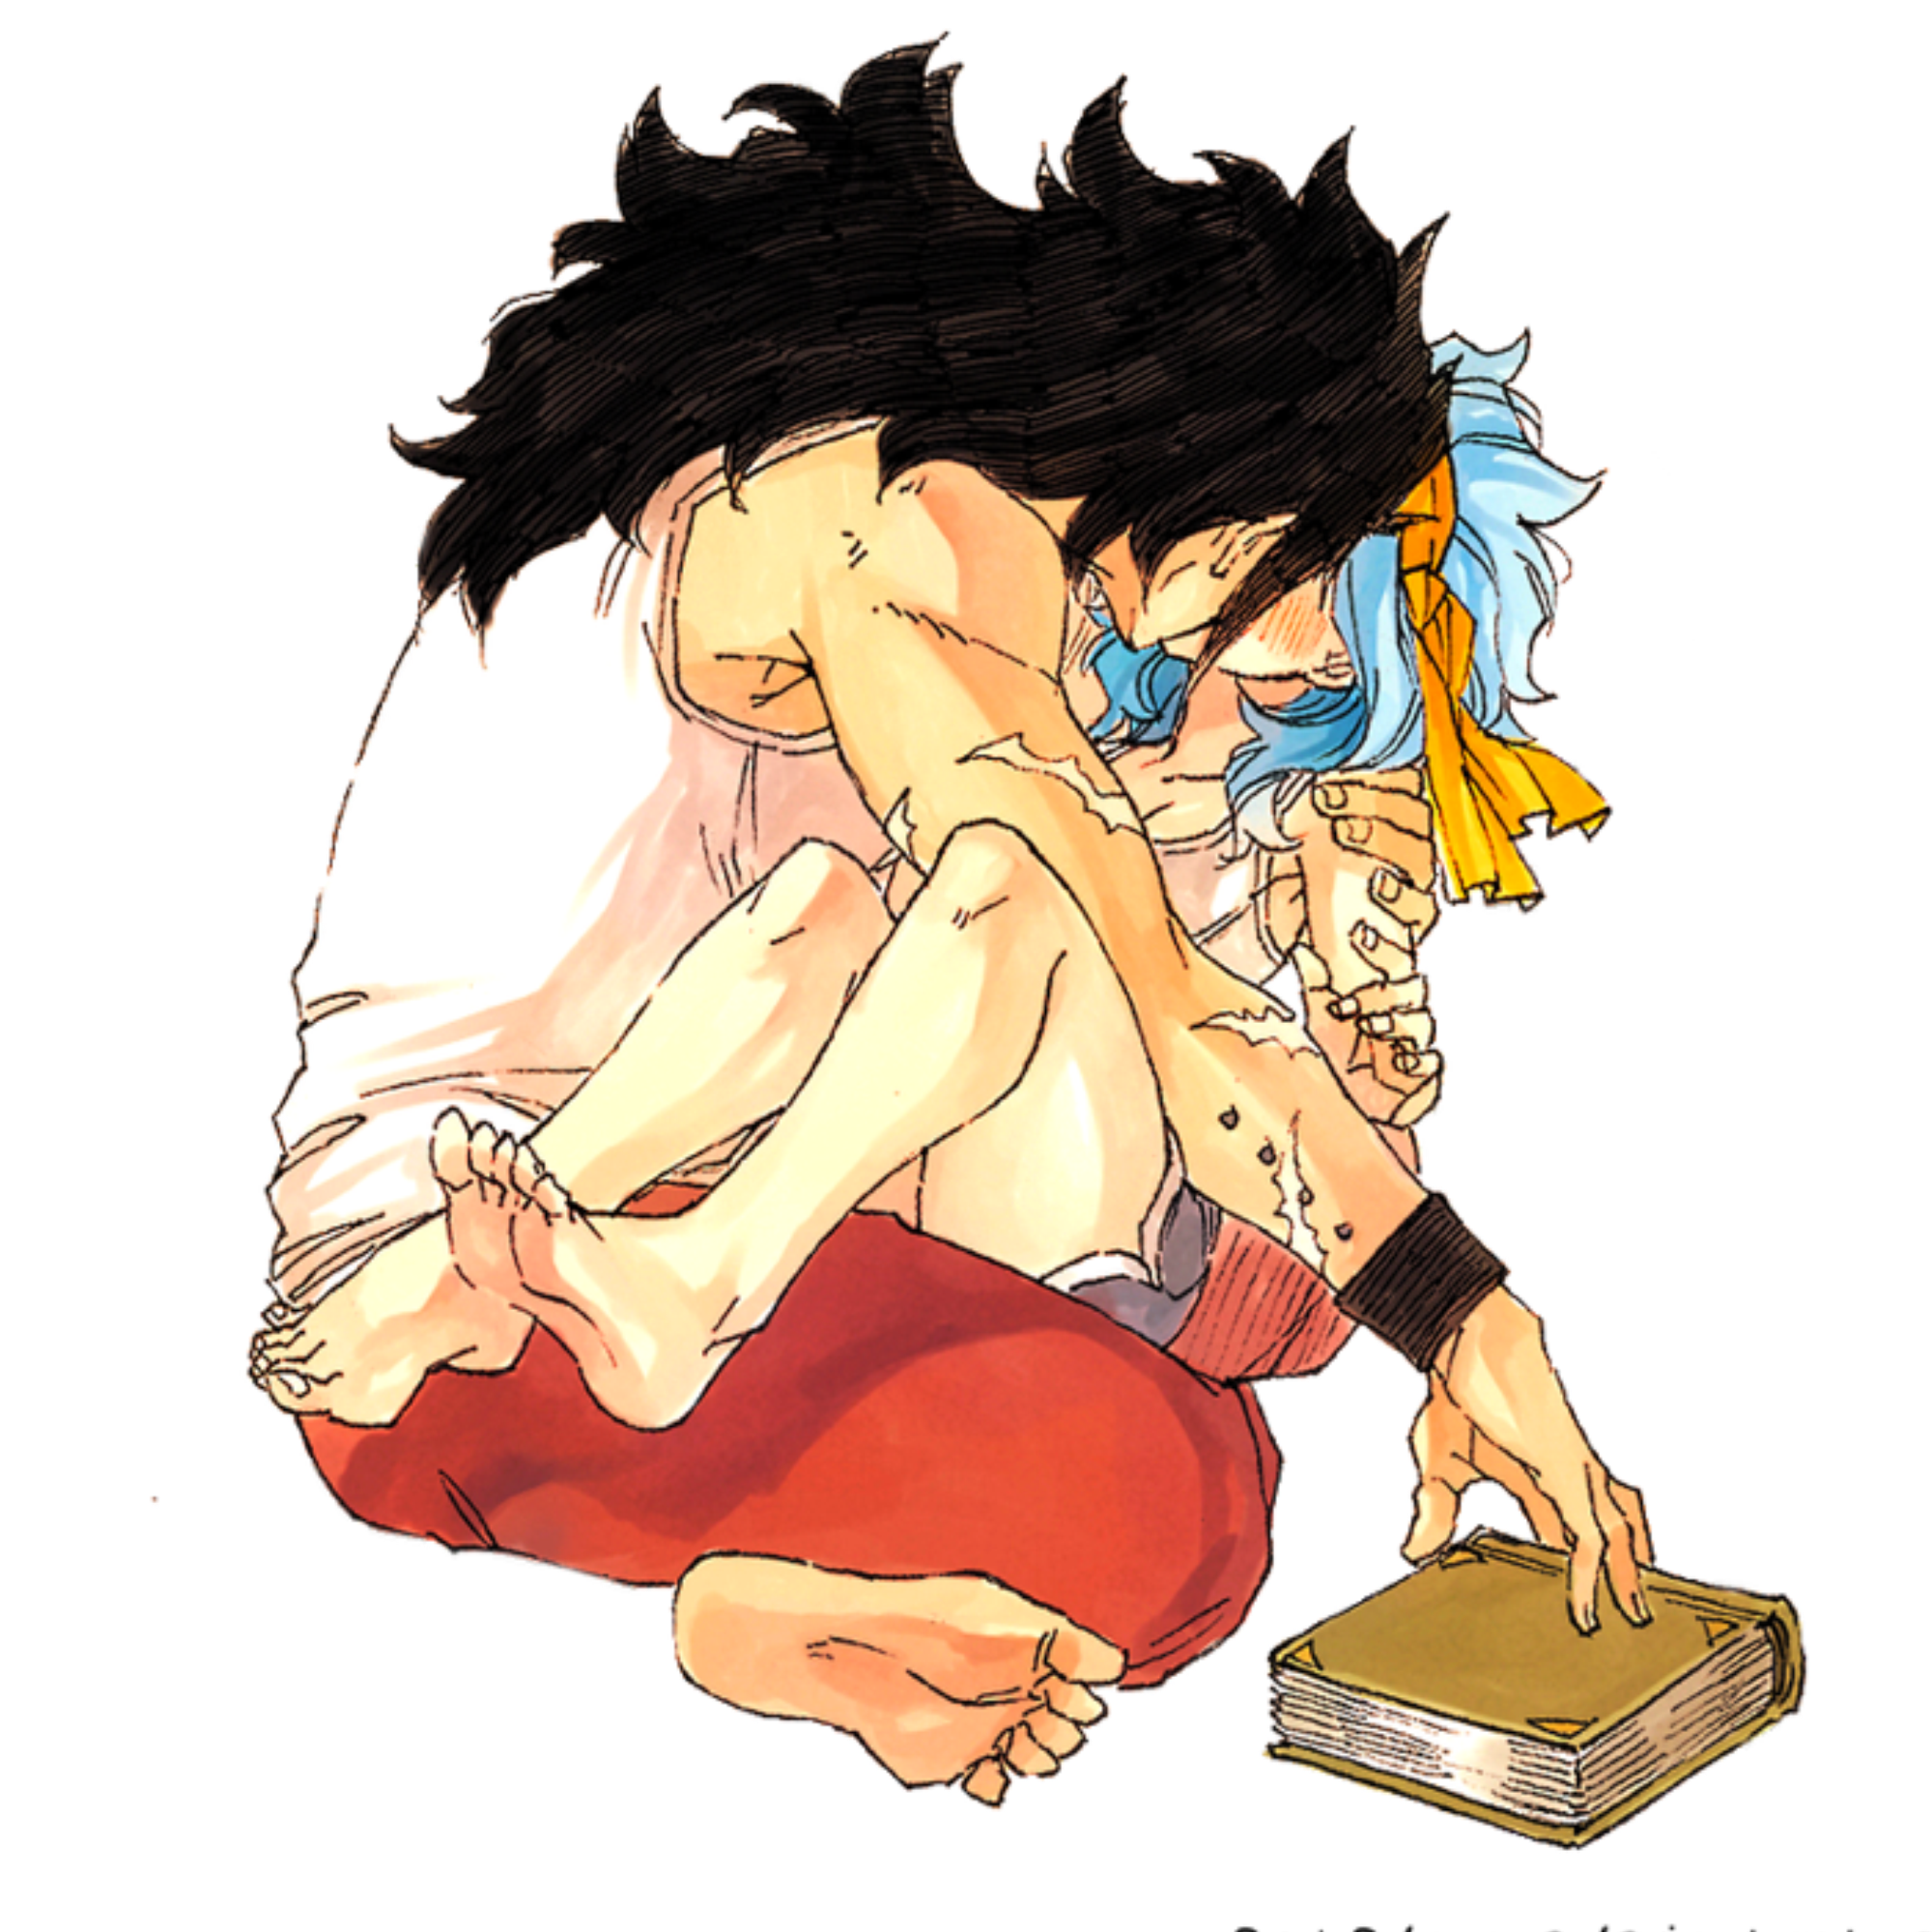 This visual is about gajevy fairytail gale levy gajeel freetoedit #gajevy #...